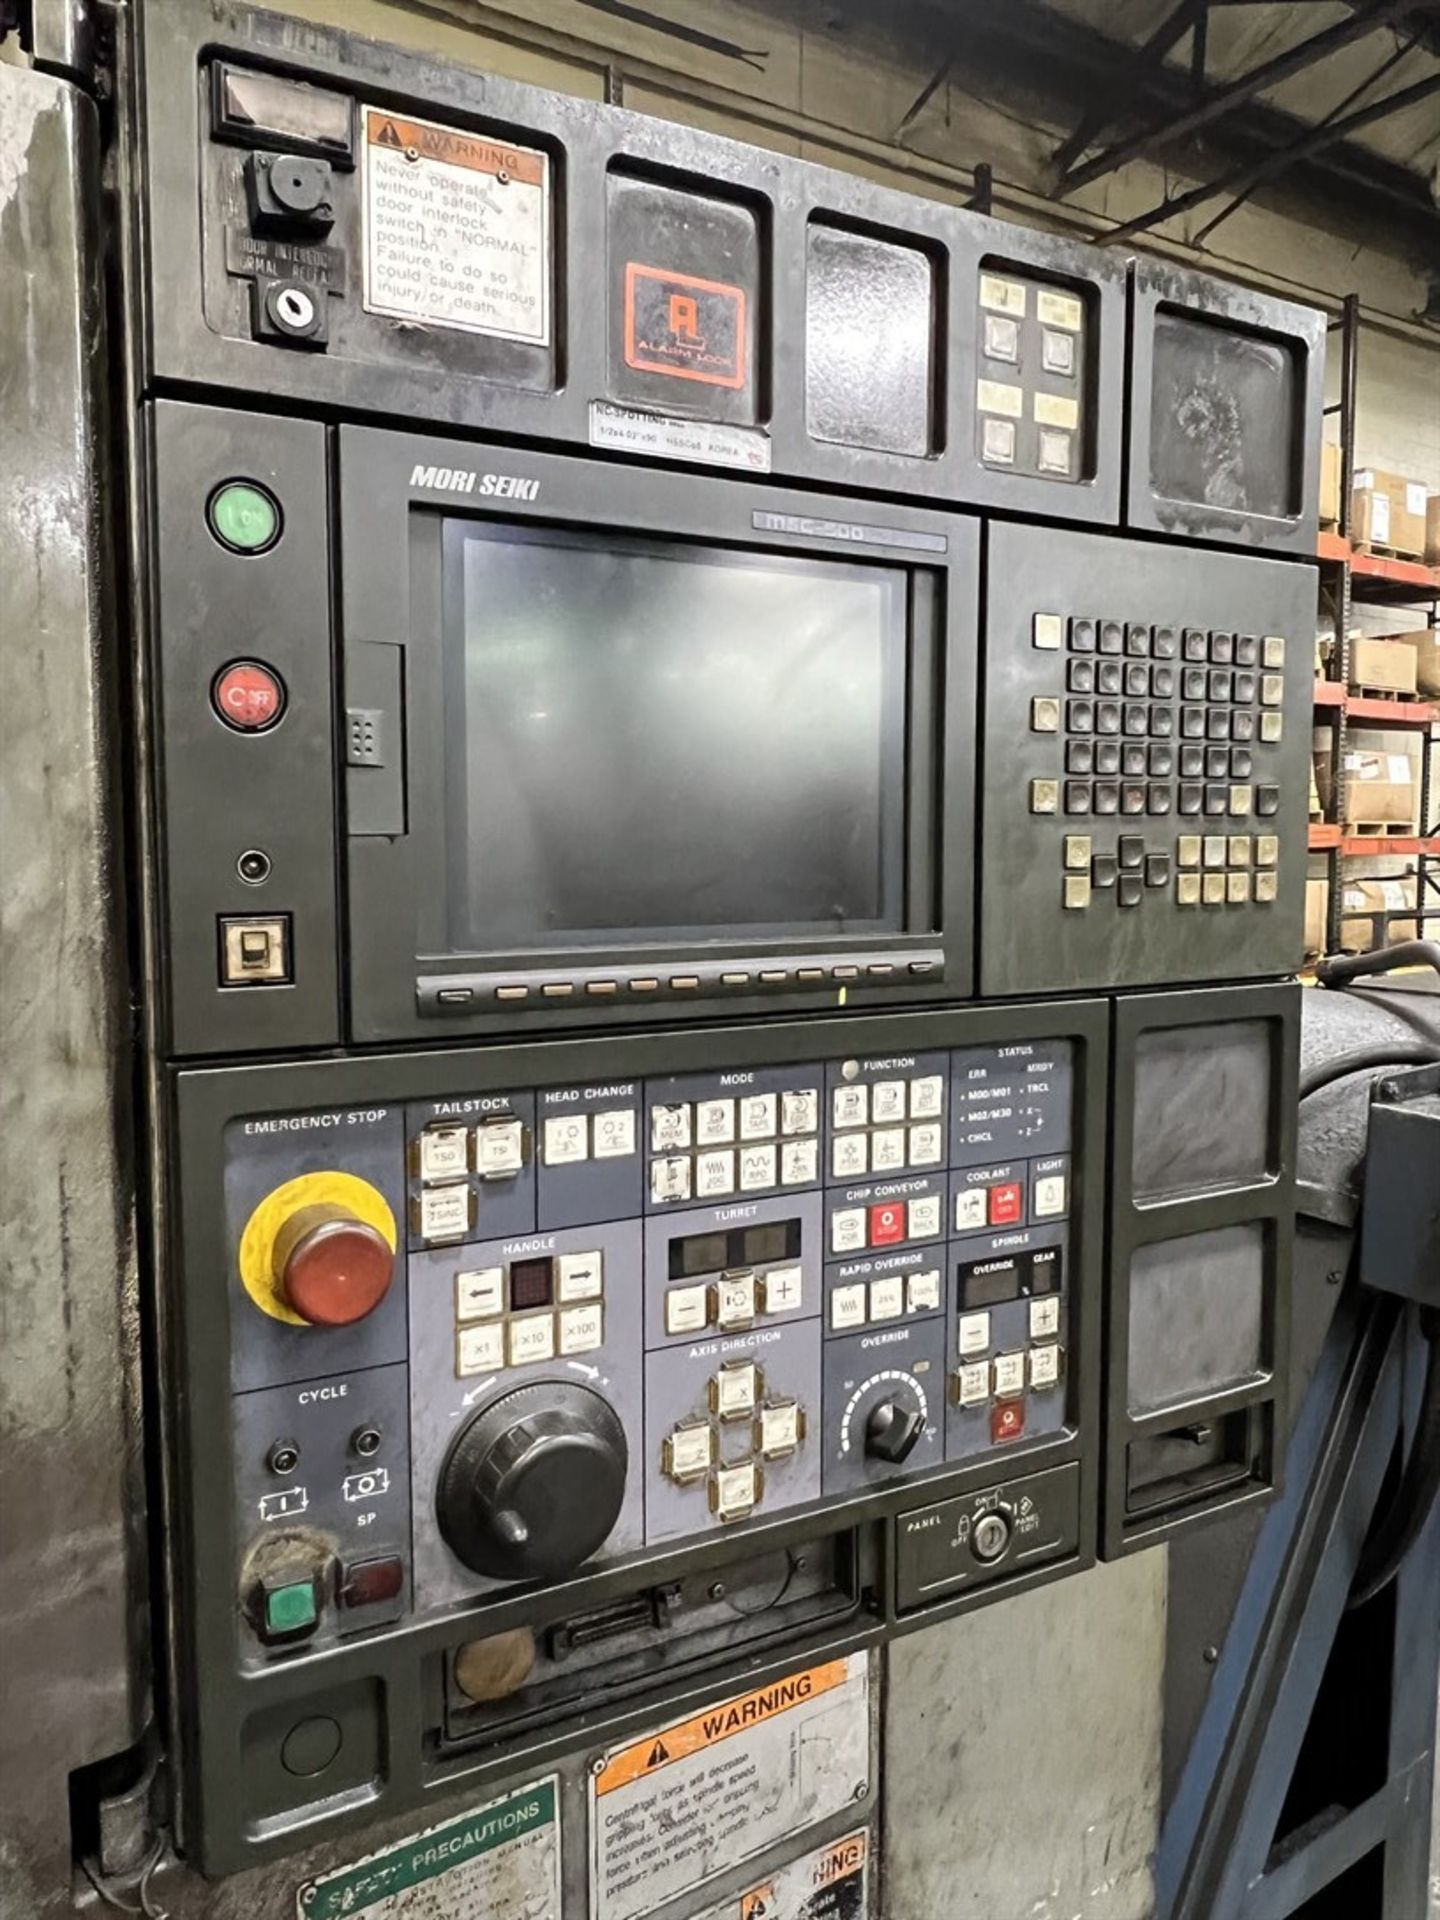 MORI SEIKI SL-200 CNC Turning Center, s/n 884, MSC-500 Control, (Parts Machine) (A rigging and - Image 8 of 12